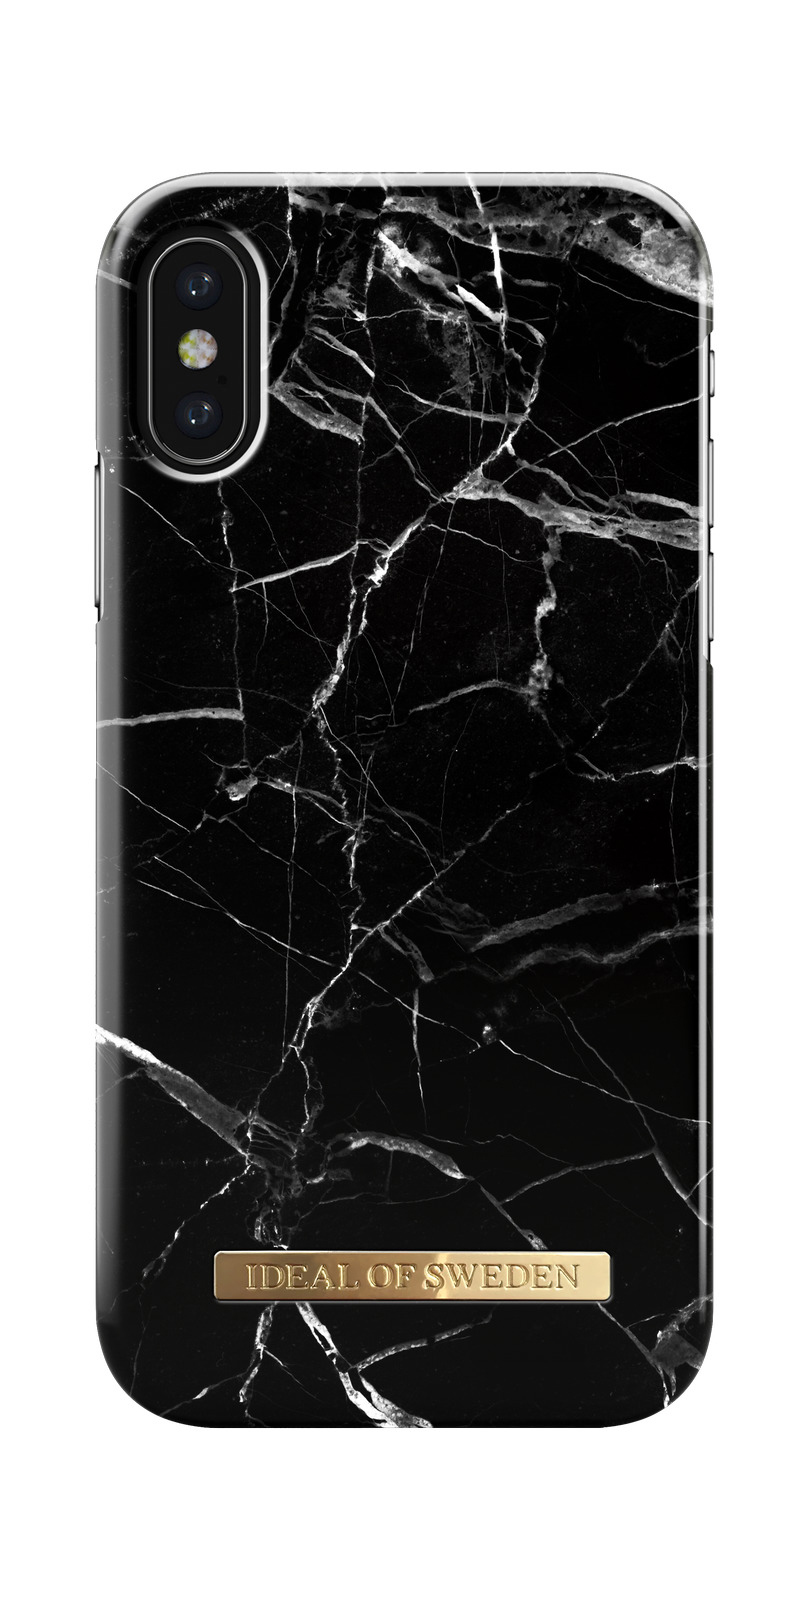 Fashion, IDEAL X, Apple, Black Marble SWEDEN OF iPhone Backcover,